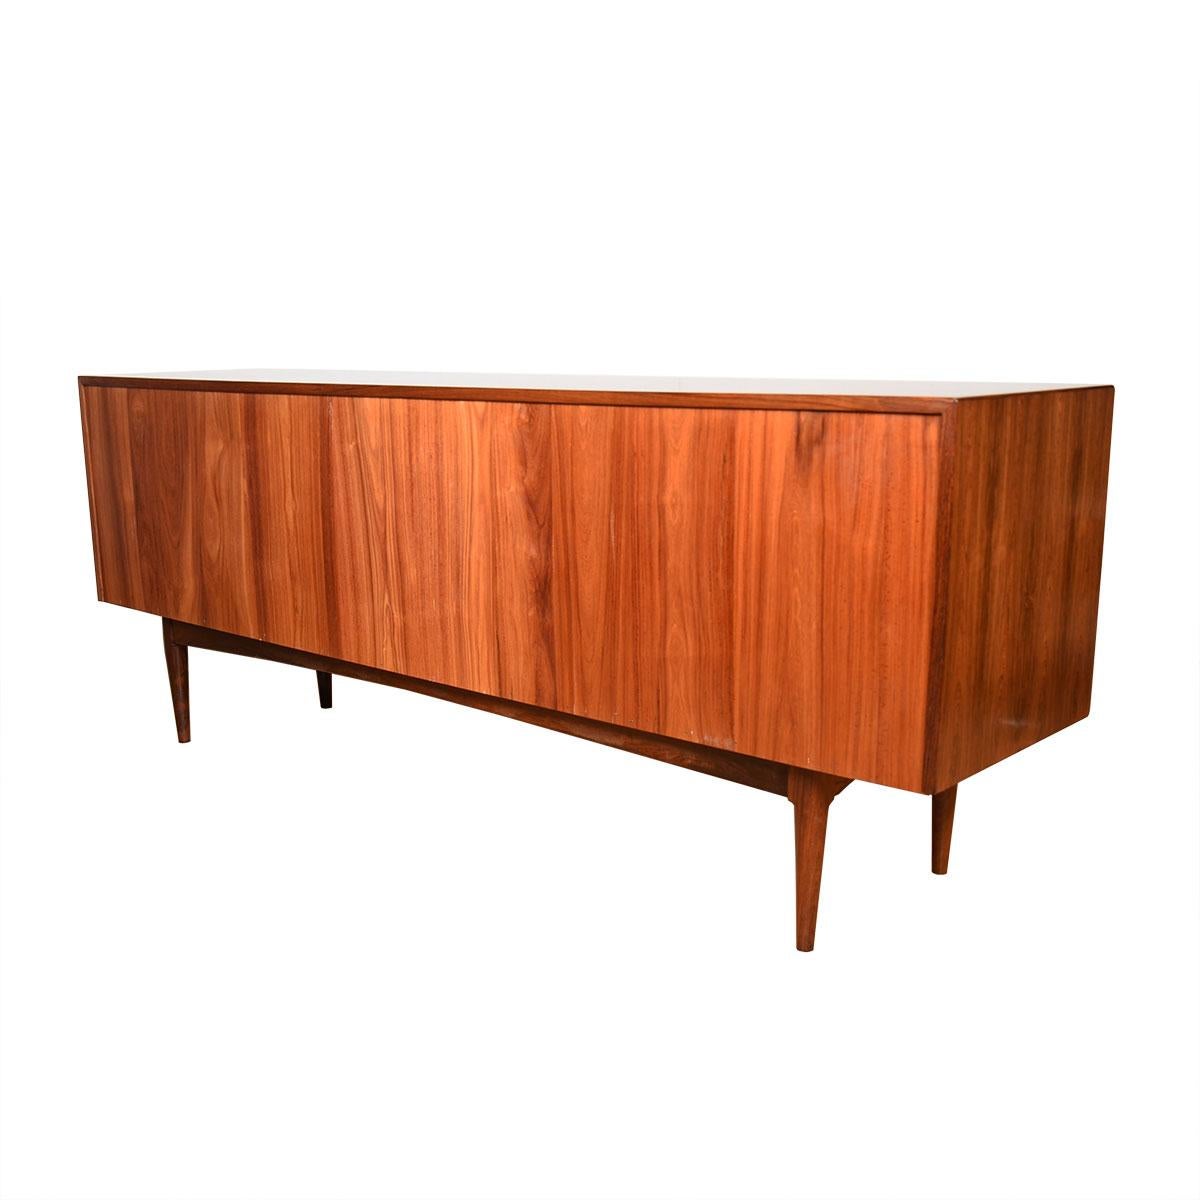 Mid-Century Modern Tambour Door Credenza in Danish Modern Rosewood with Finished Backside